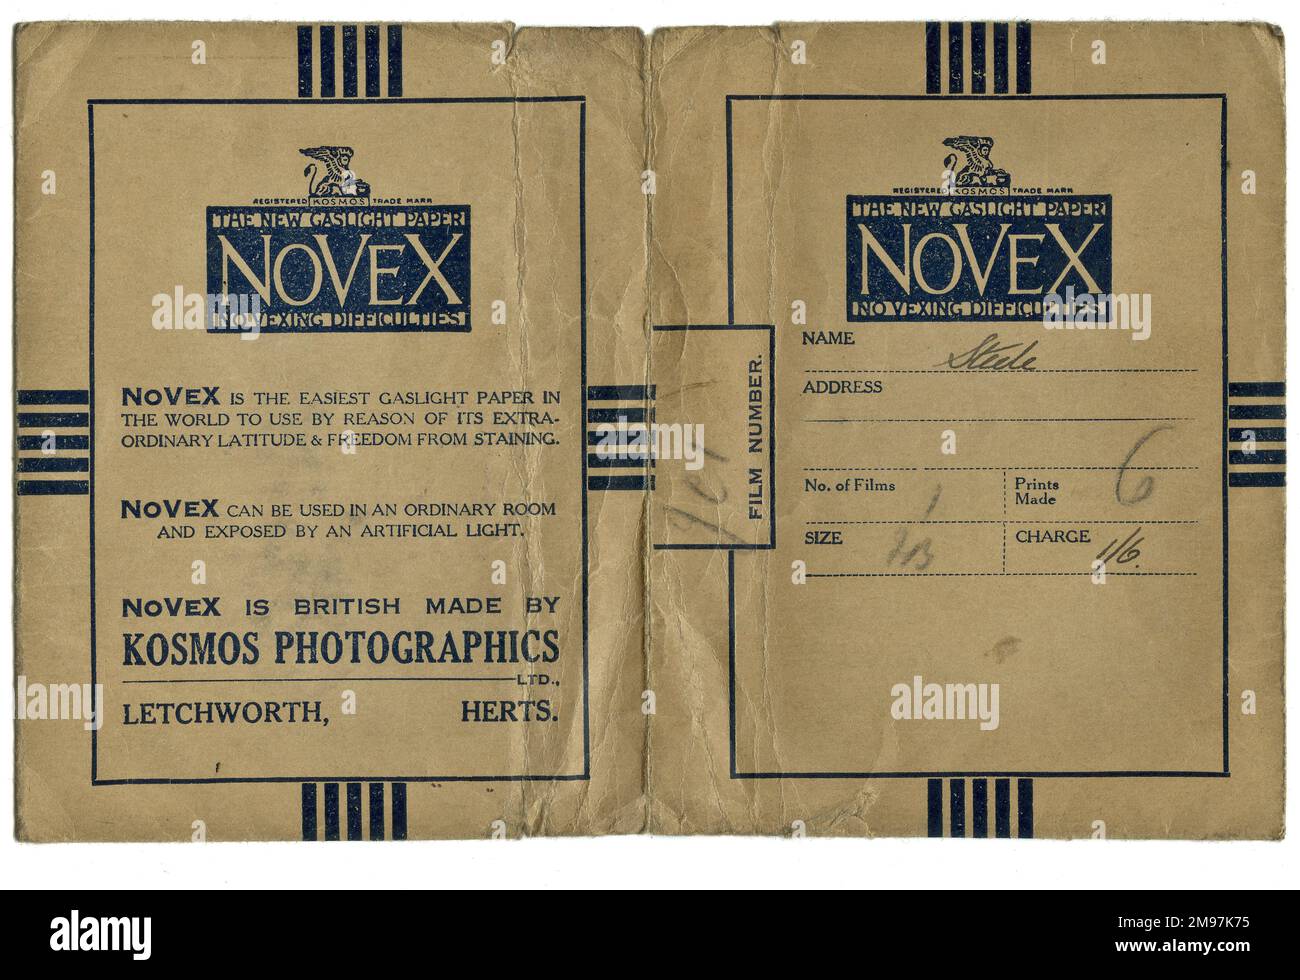 Photographic film wallet advertising Novex Gaslight Paper made by Kosmos Photographics, Letchworth, Hertfordshire. The customer's name is Steele and the cost of developing is one shilling and sixpence. Stock Photo